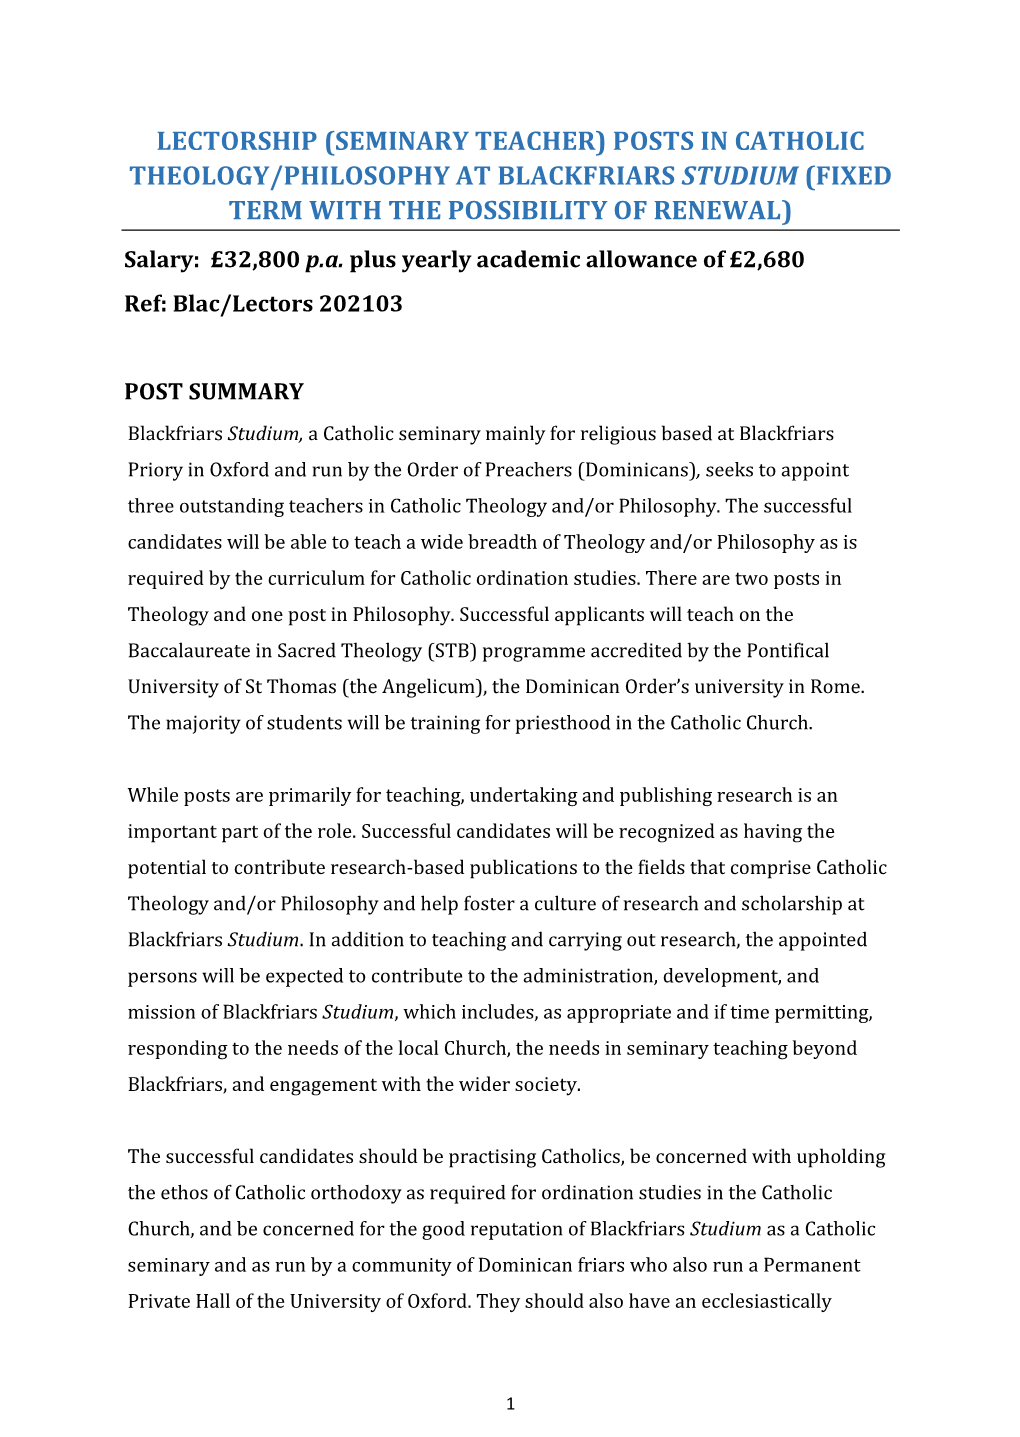 POSTS in CATHOLIC THEOLOGY/PHILOSOPHY at BLACKFRIARS STUDIUM (FIXED TERM with the POSSIBILITY of RENEWAL) Salary: £32,800 P.A